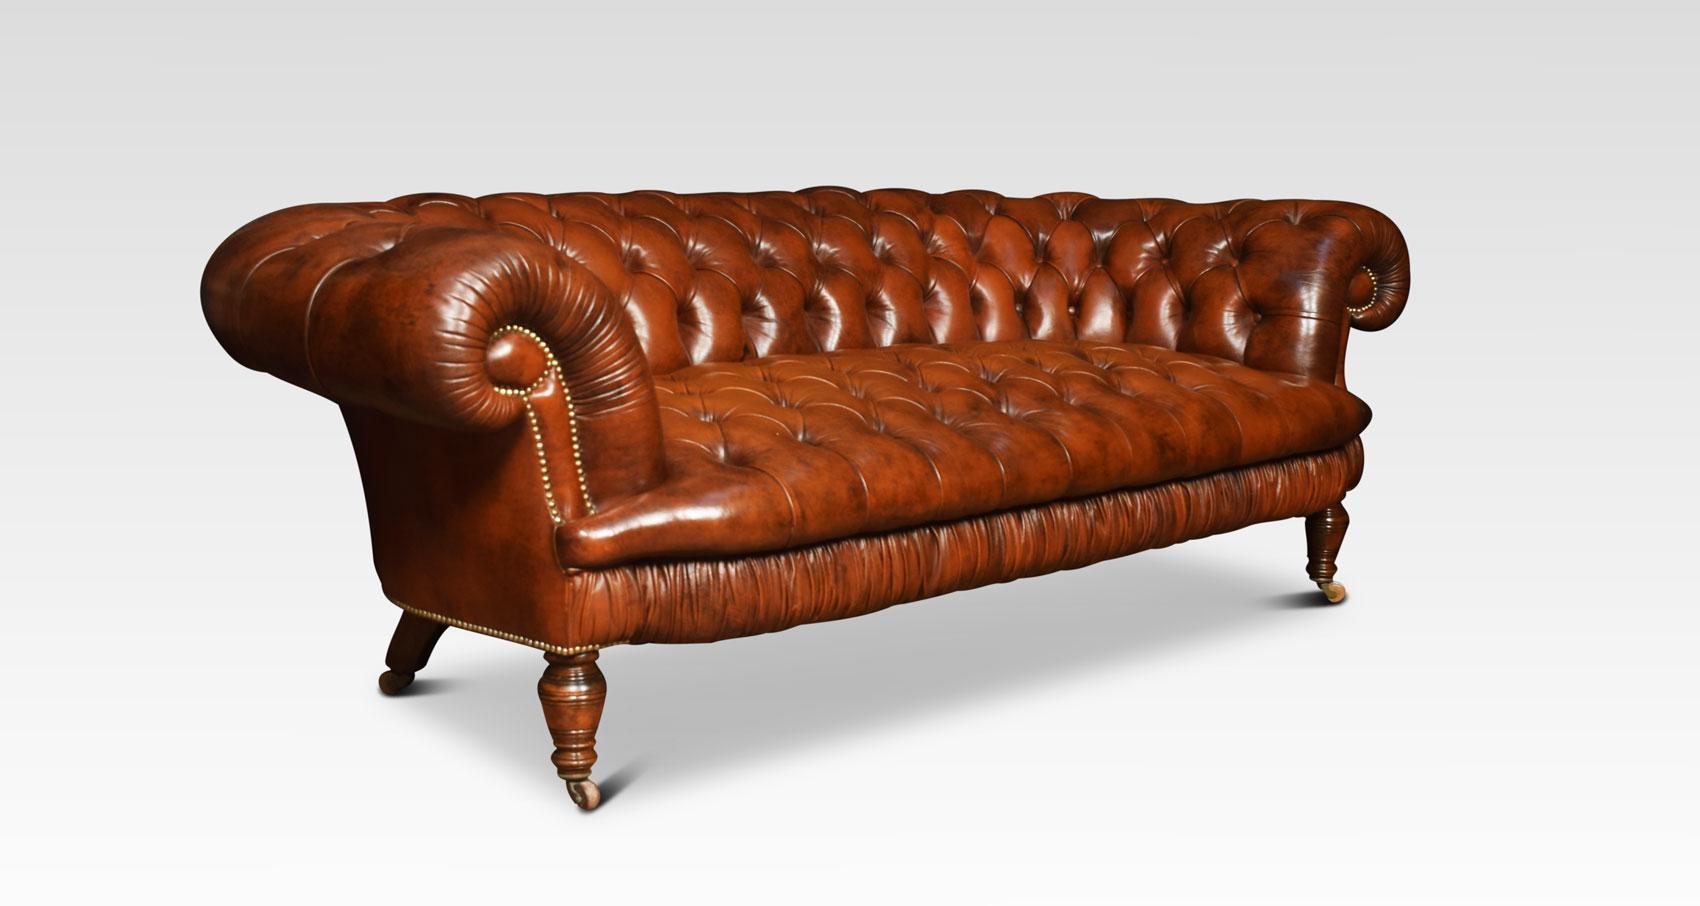 Large three-seat brown leather Chesterfield sofa, having deep buttoned back and seat, raised up on turned feet with brass ceramic castors. Good solid condition, the leather is soft, nicely worn in.
Dimensions:
Height 29 inches height to seat 20.5